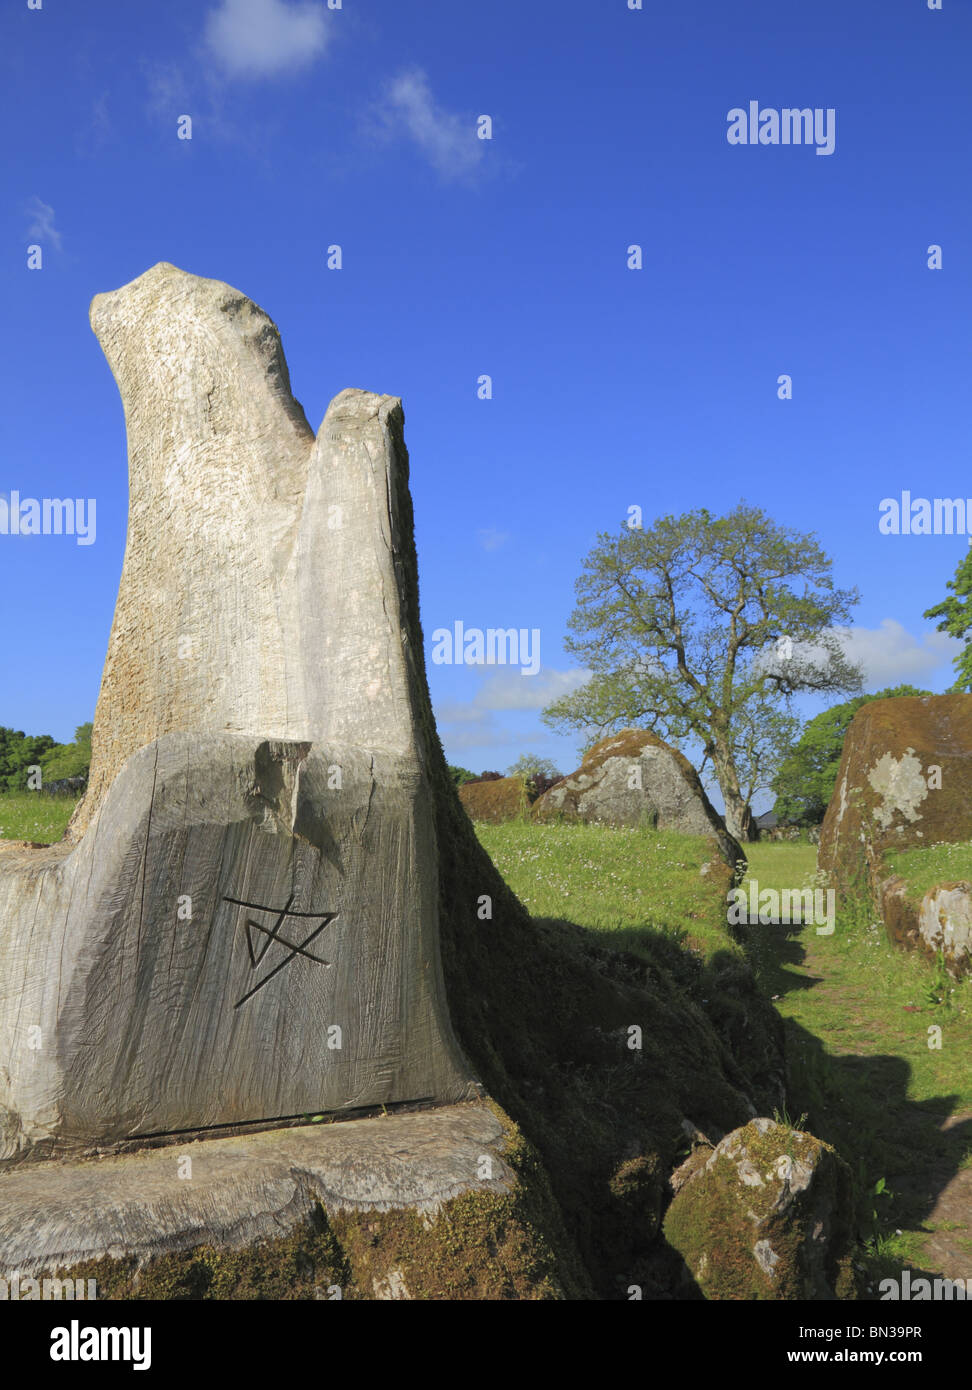 A piece of timber sculpture marks the entrance to Grange Stone Circle in County Limerick, Rep. of Ireland. Stock Photo